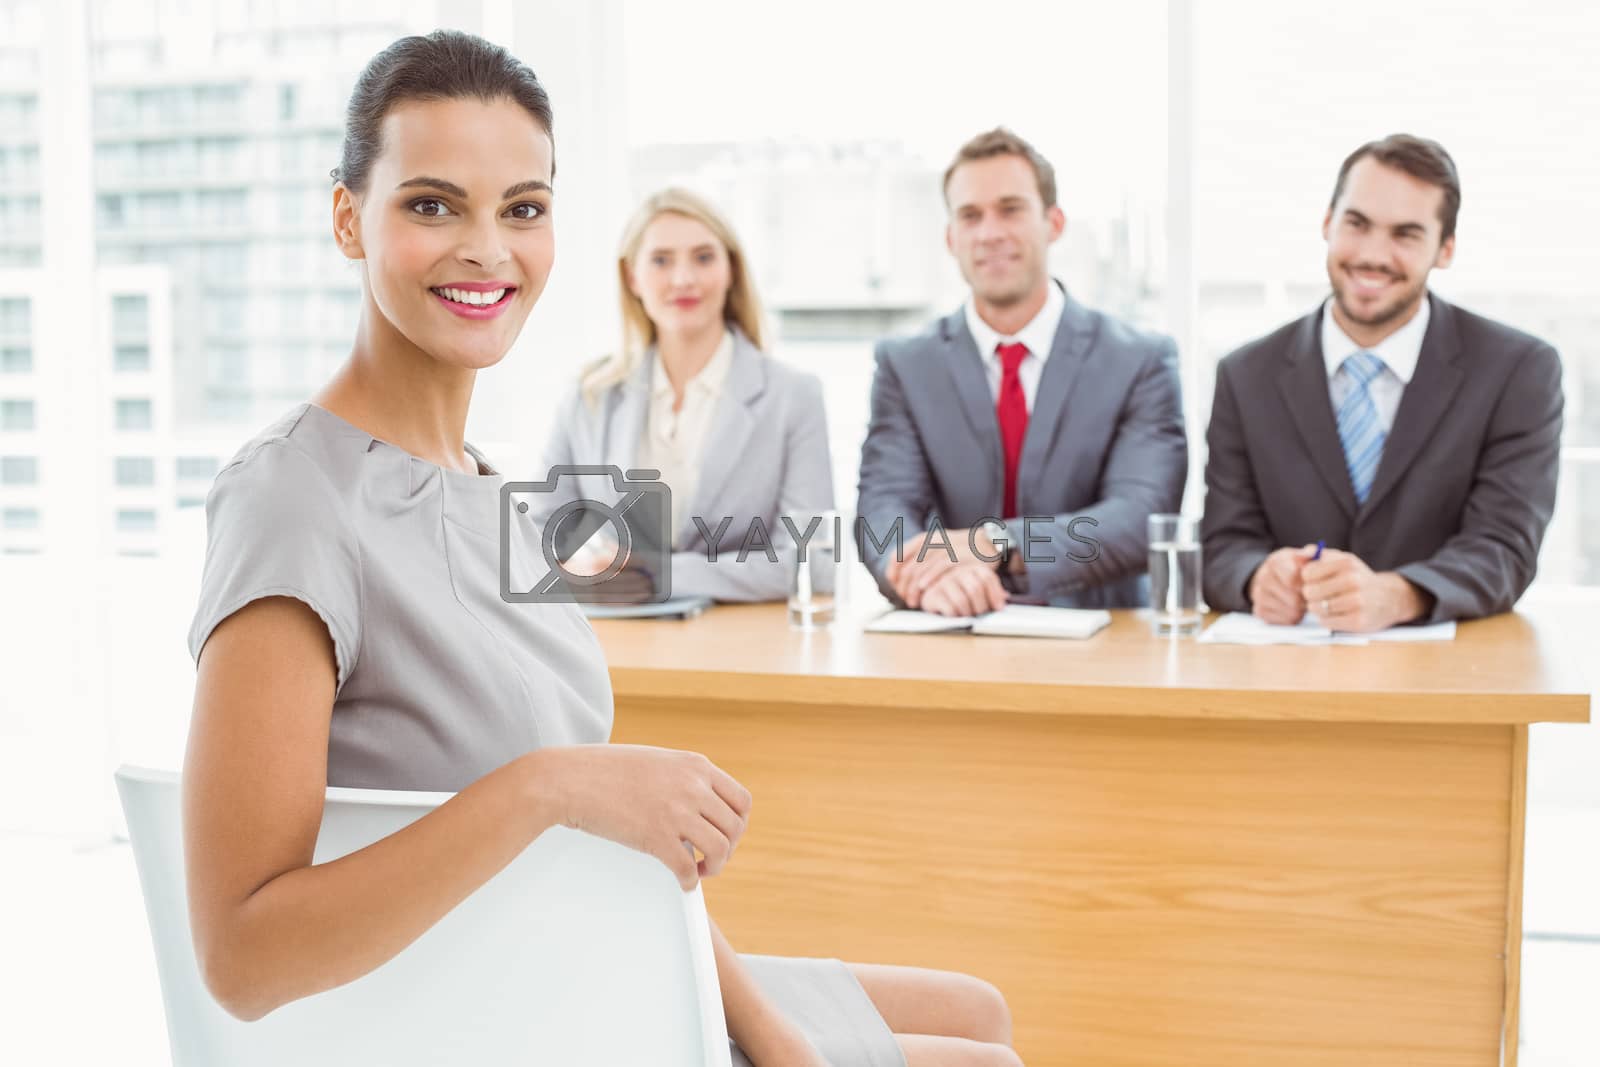 Royalty free image of Woman in front of corporate personnel officers by Wavebreakmedia